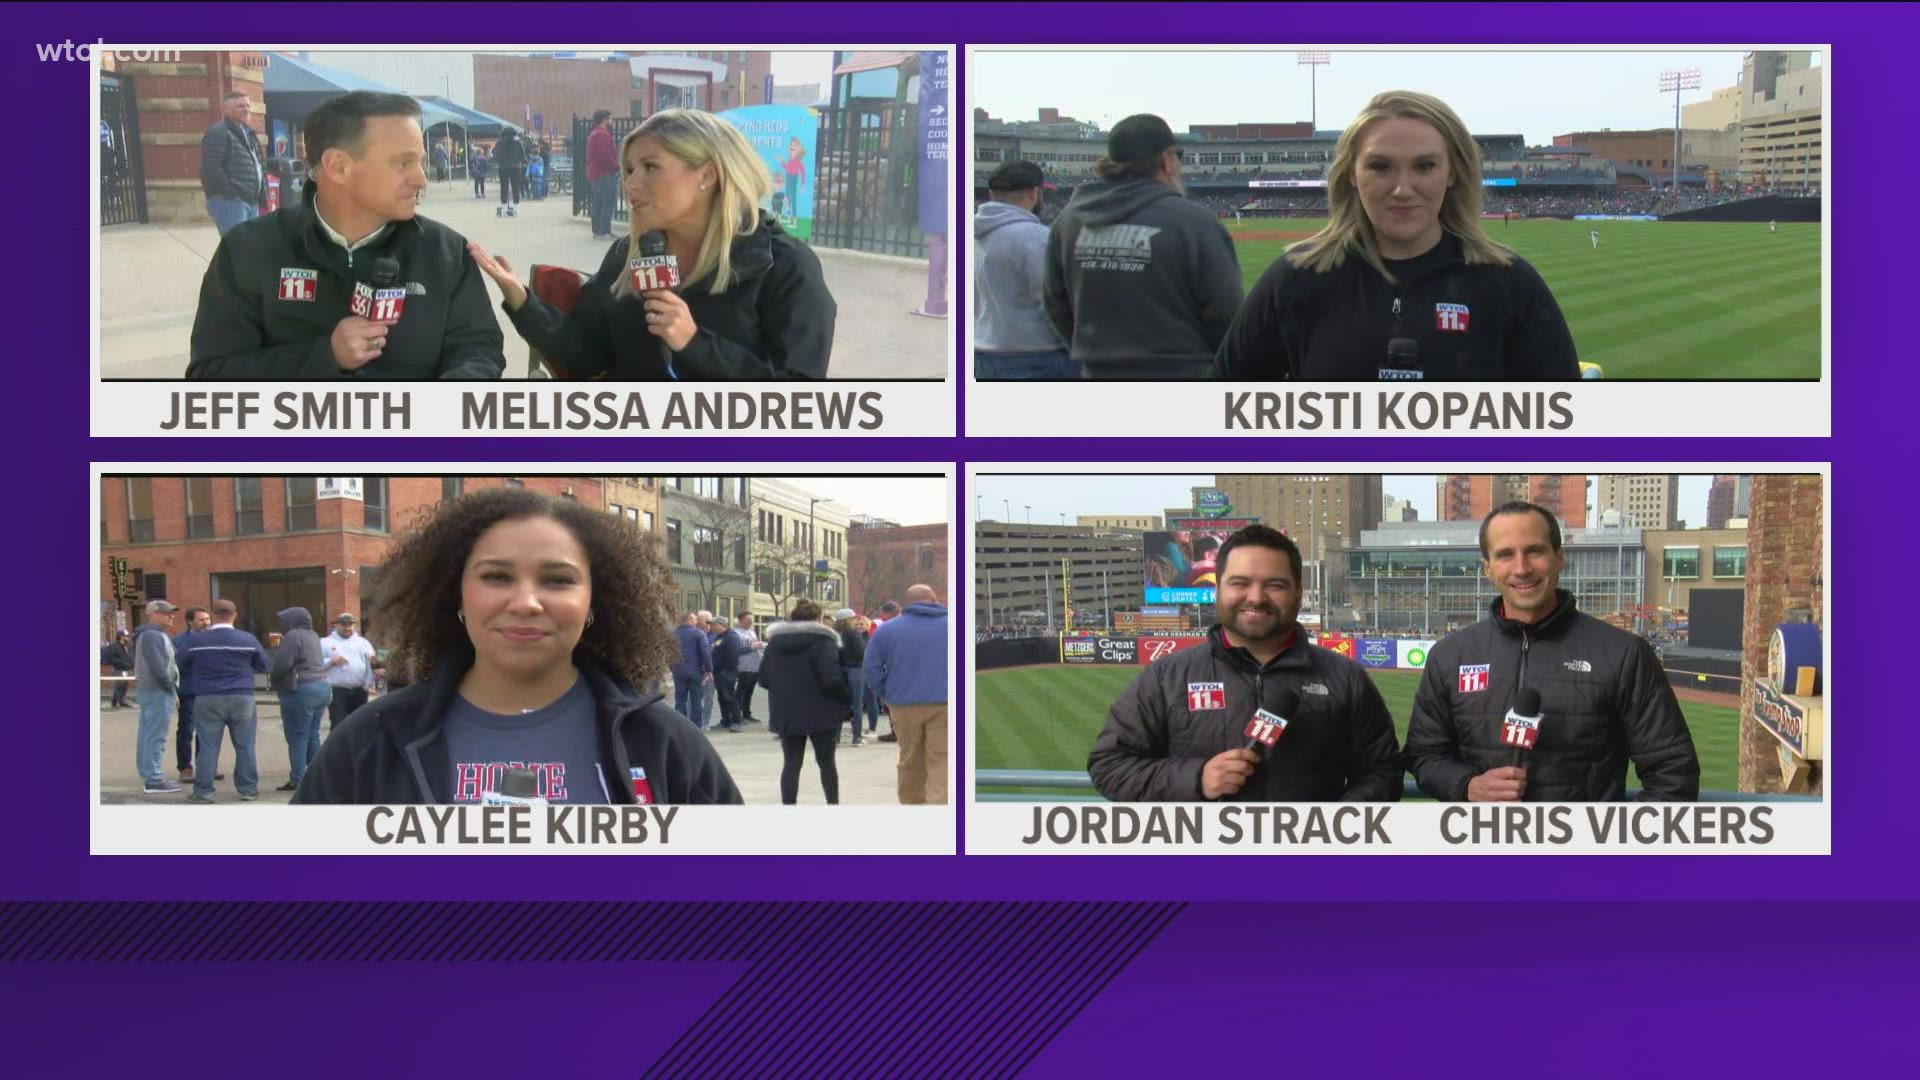 The WTOL 11 News team brings you live coverage of the 20th Opening Day at Fifth Third Field!